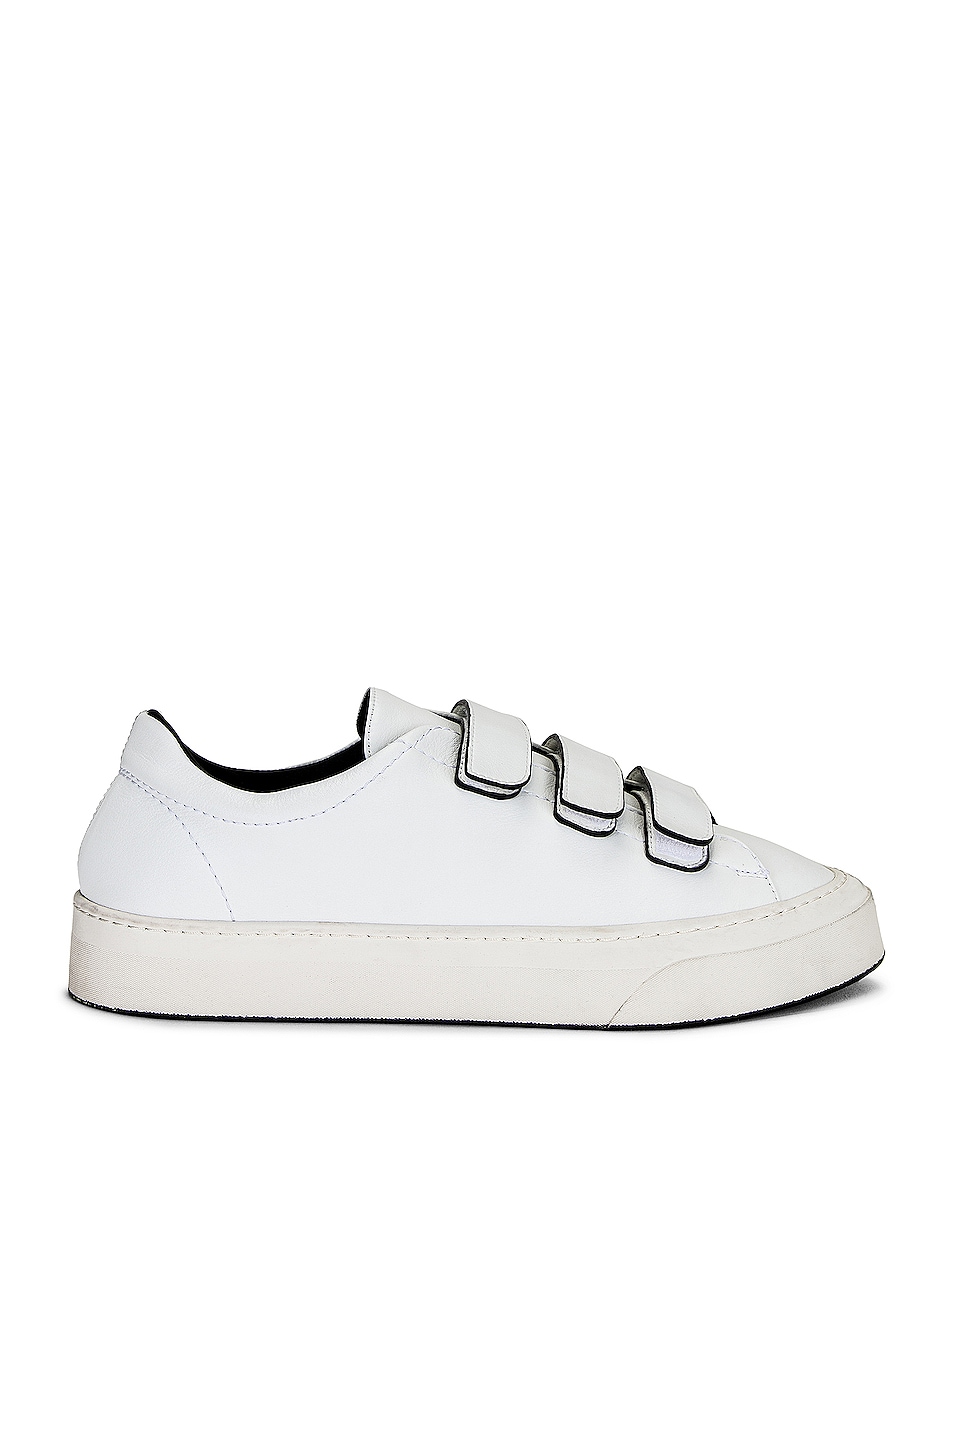 Image 1 of The Row Mary H Strap Sneakers in Milk & Milk